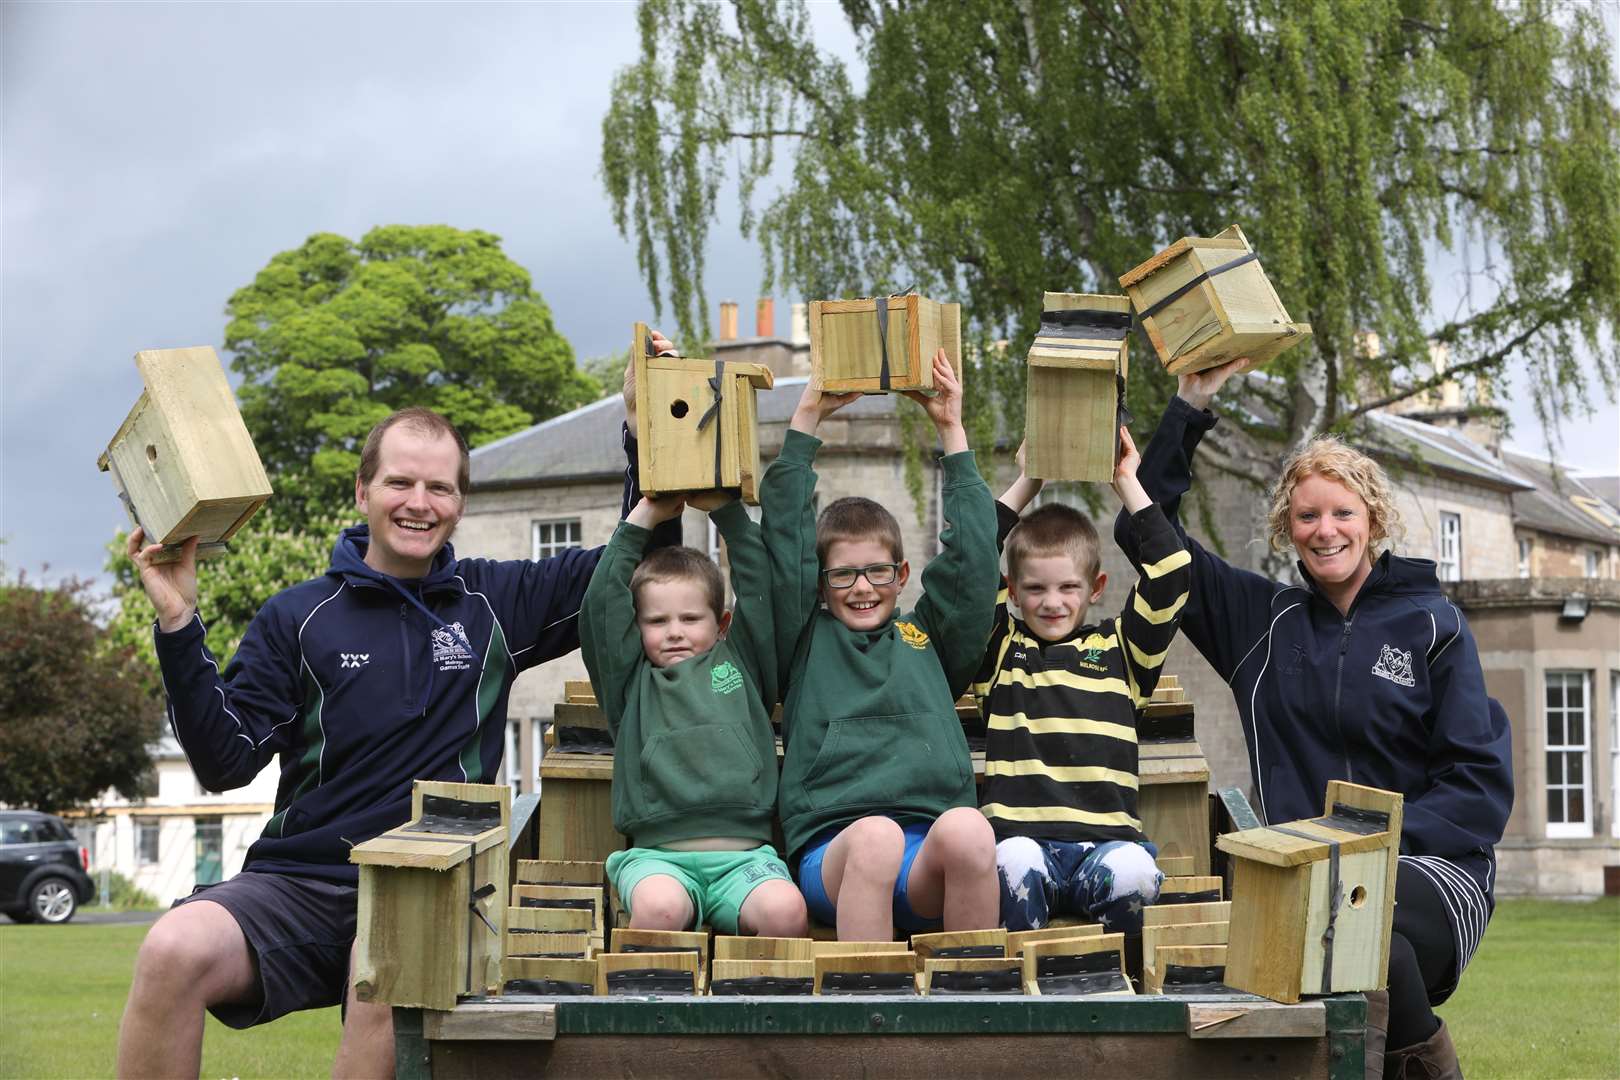 Tom Rawson has been making bird boxes to sell and donate money to the NHS with his wife Emma and 3 sons Fergus age 8, Hector age 6 and Lochie age 4.